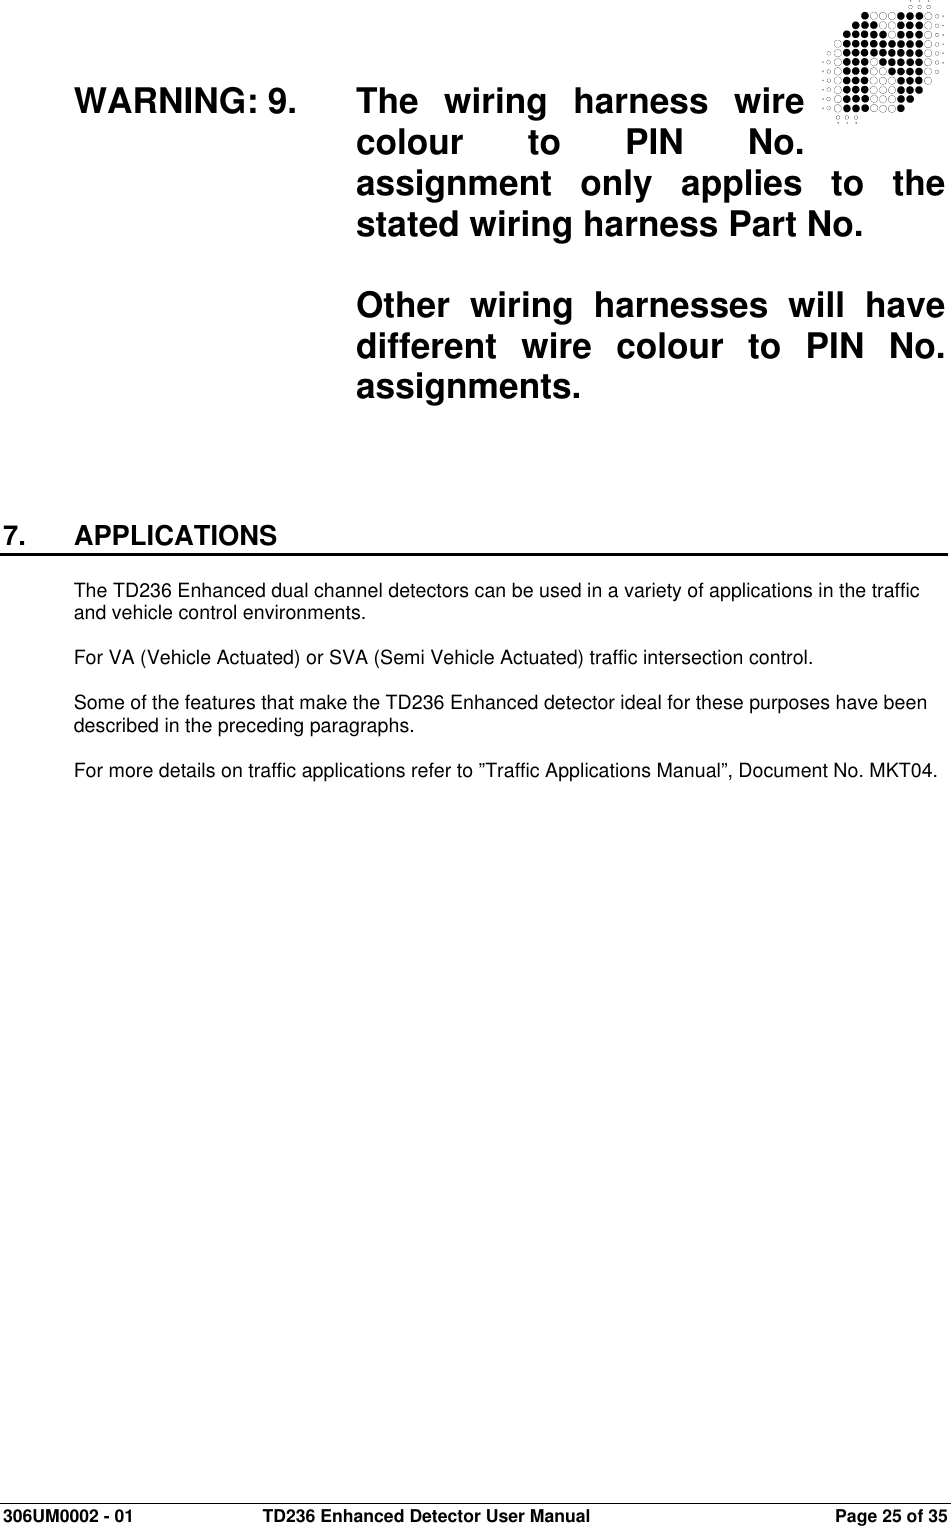  306UM0002 - 01  TD236 Enhanced Detector User Manual   Page 25 of 35   WARNING: 9.  The  wiring  harness  wire colour  to  PIN  No. assignment  only  applies  to  the stated wiring harness Part No.    Other  wiring  harnesses  will  have different  wire  colour  to  PIN  No. assignments.      7.  APPLICATIONS  The TD236 Enhanced dual channel detectors can be used in a variety of applications in the traffic and vehicle control environments.  For VA (Vehicle Actuated) or SVA (Semi Vehicle Actuated) traffic intersection control.  Some of the features that make the TD236 Enhanced detector ideal for these purposes have been described in the preceding paragraphs.  For more details on traffic applications refer to ”Traffic Applications Manual”, Document No. MKT04.   